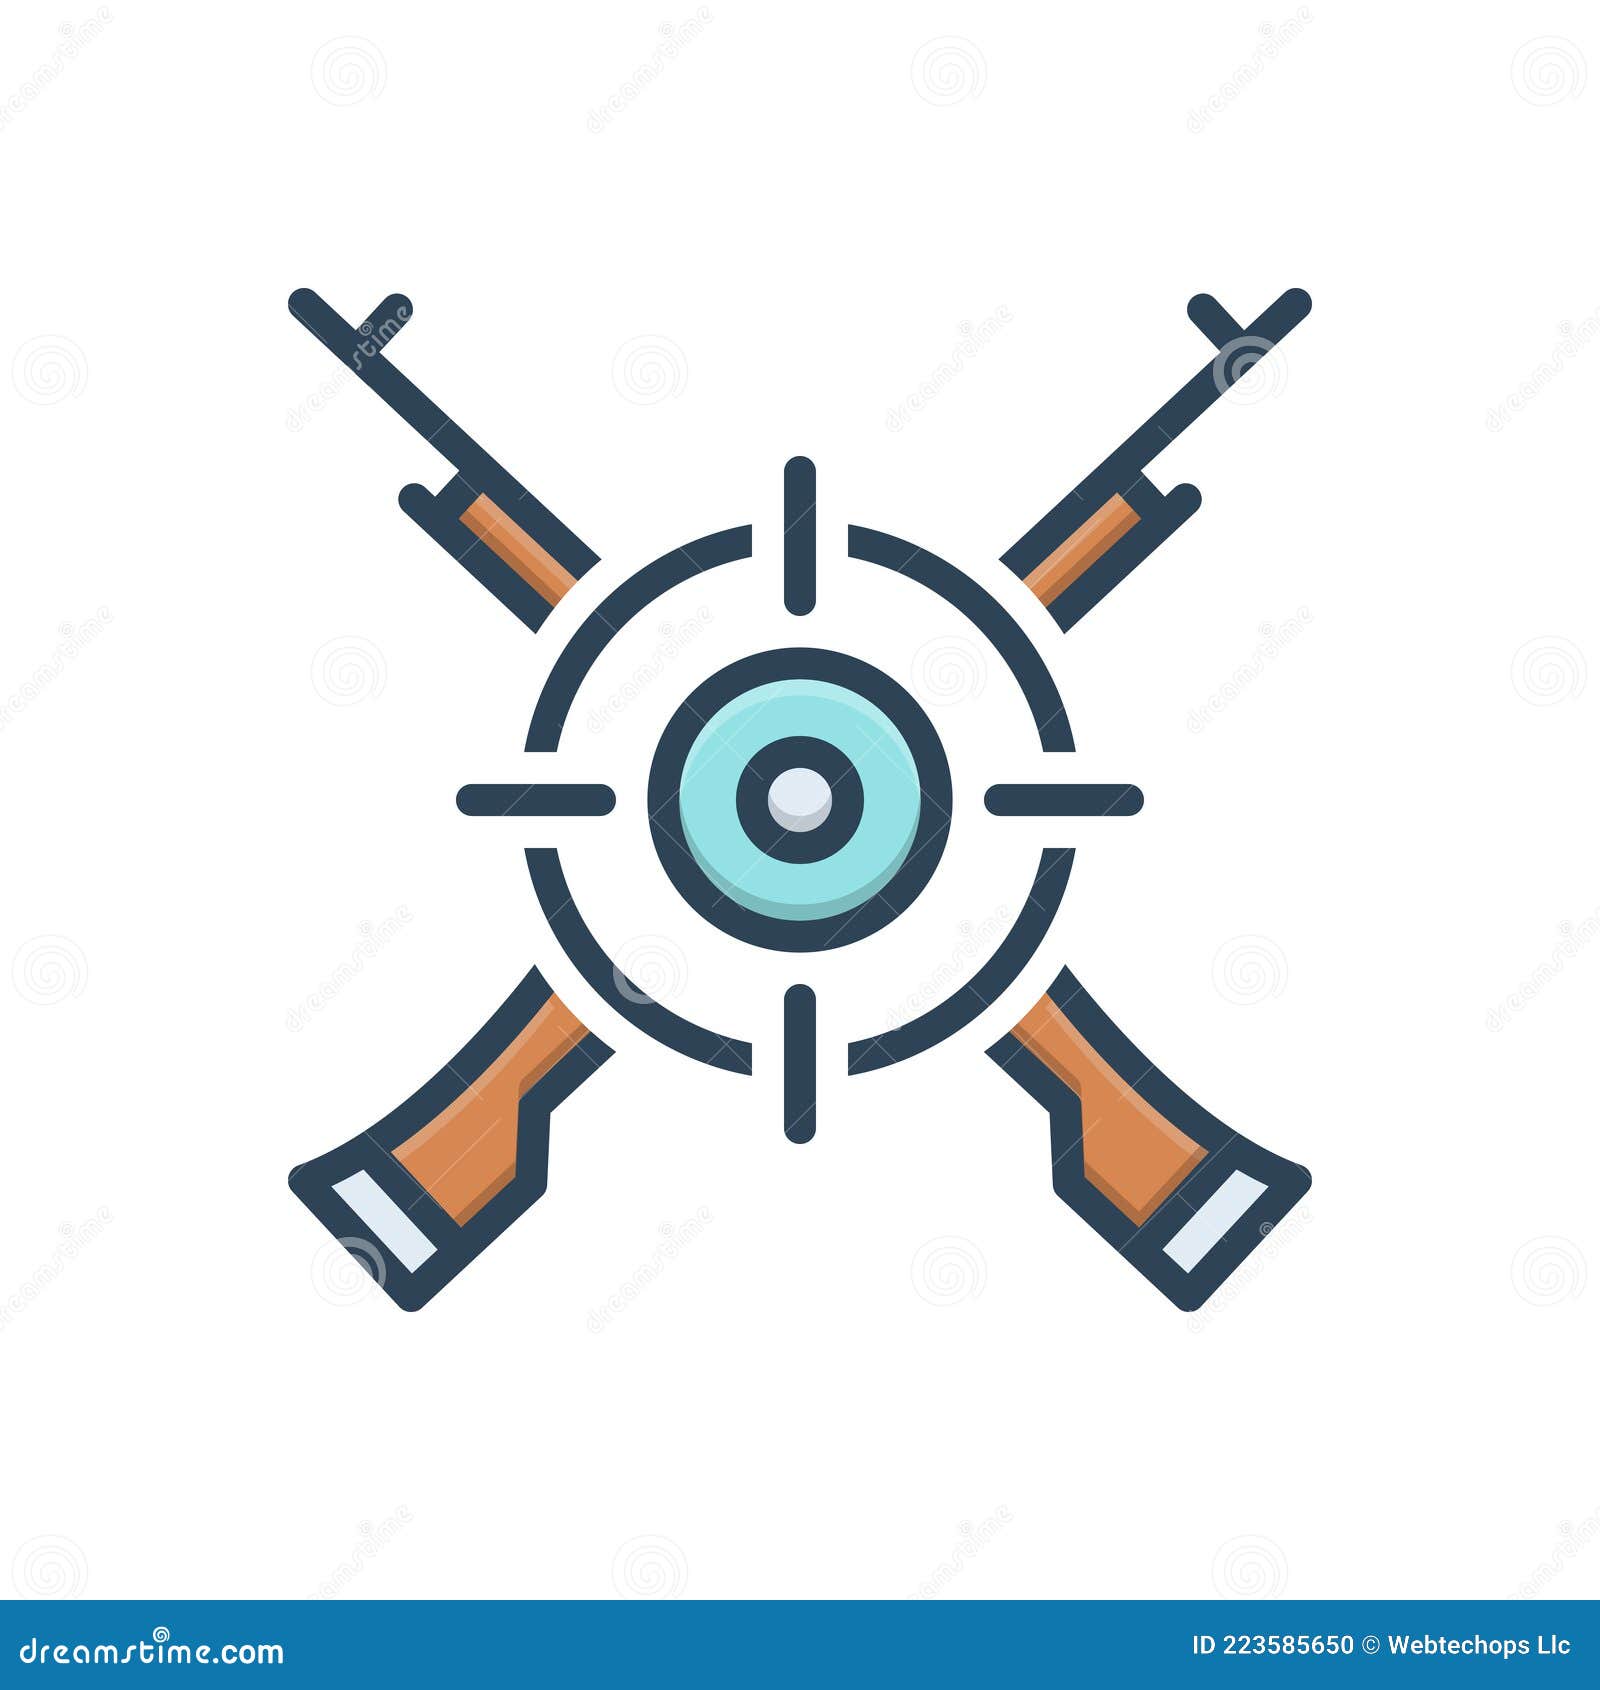 color  icon for marksman, sharpshooter and target